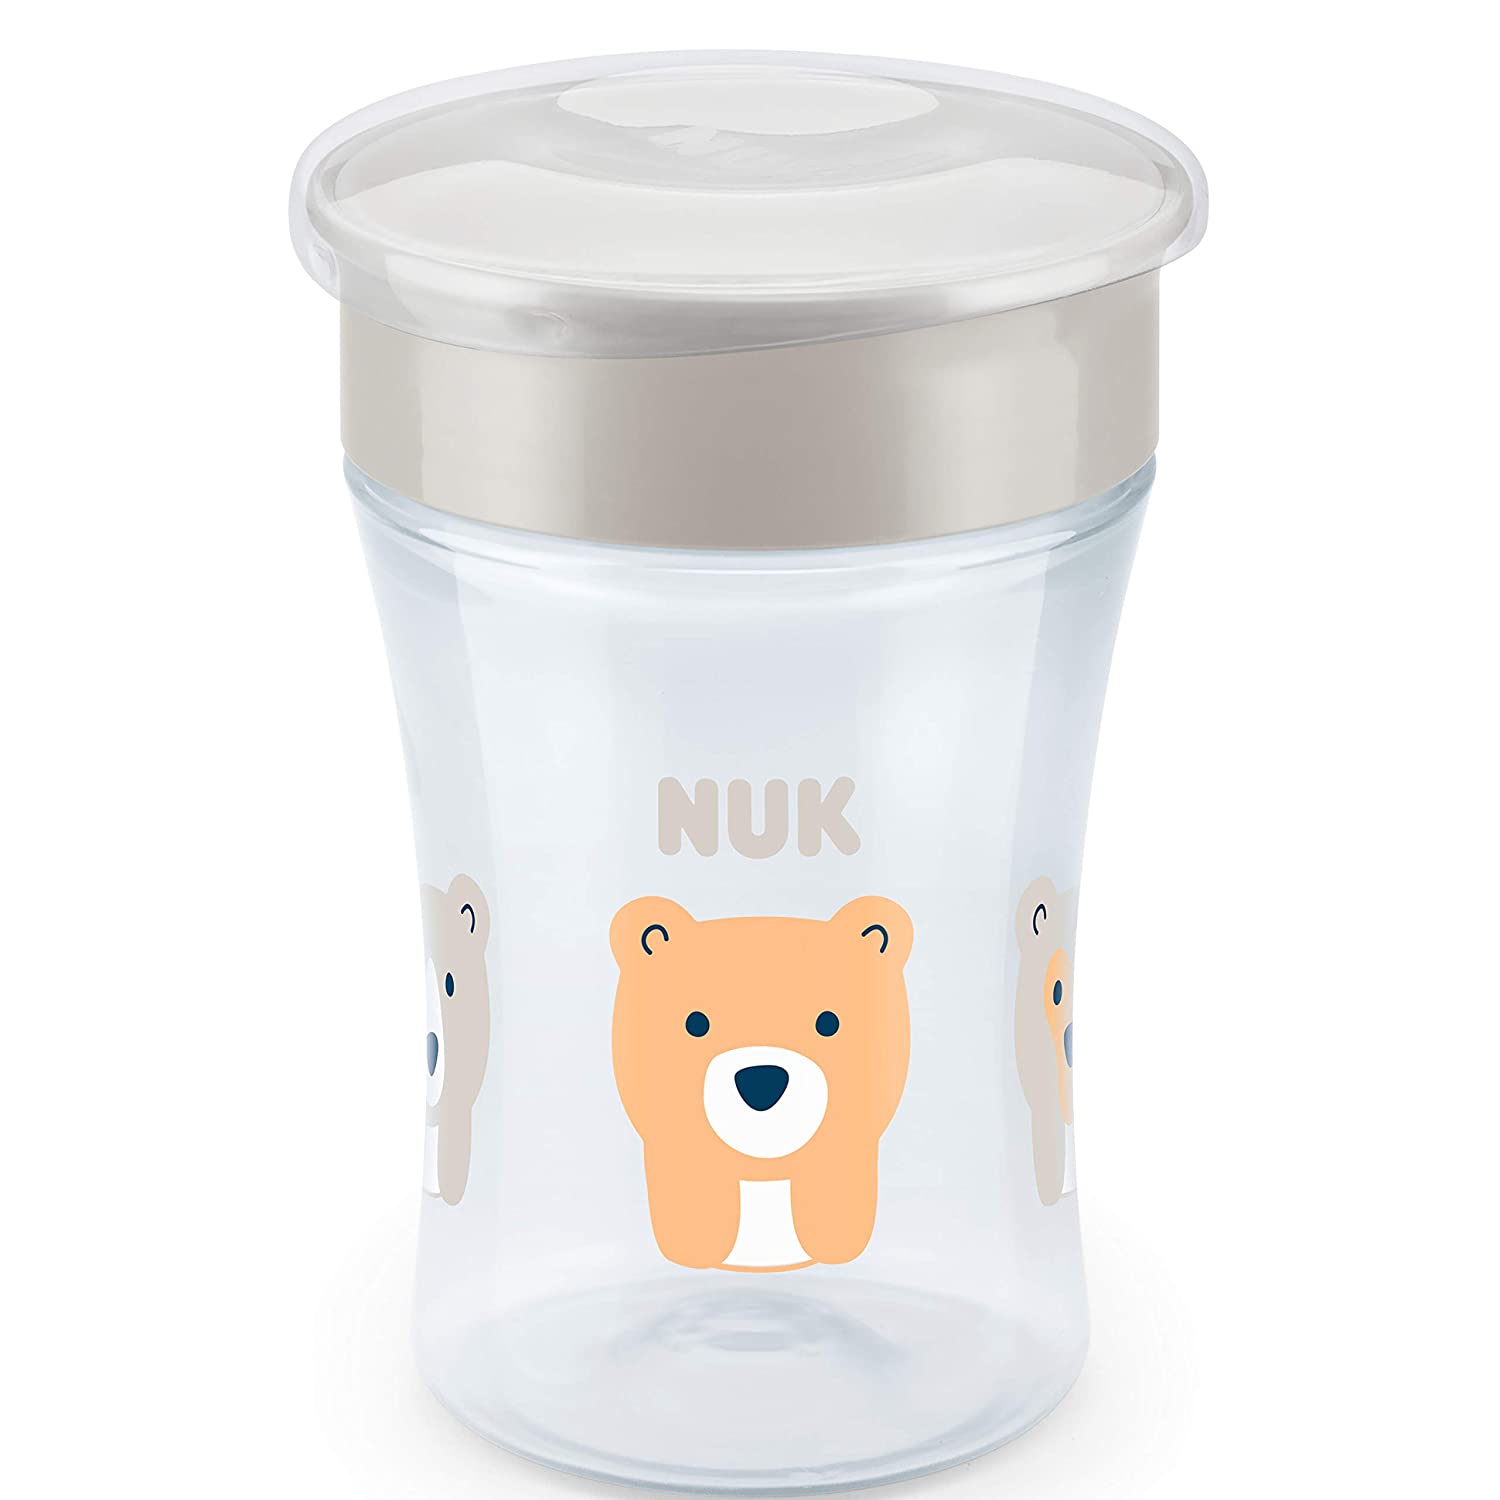 NUK Magic Learn to Drink Cup